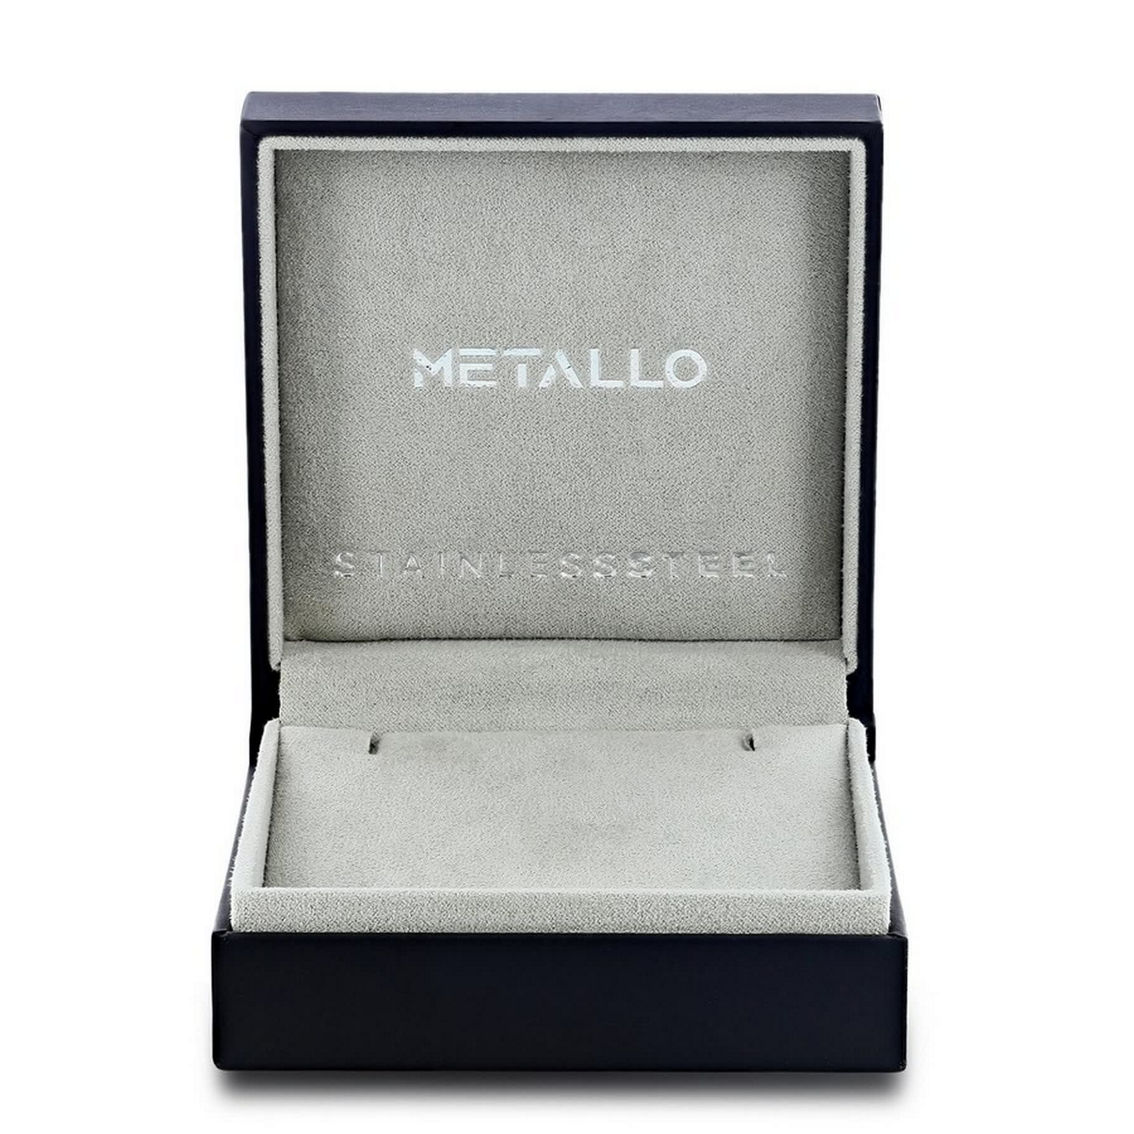 Metallo Stainless Steel Brushed Cross Necklace - Gold Plated - Image 2 of 3